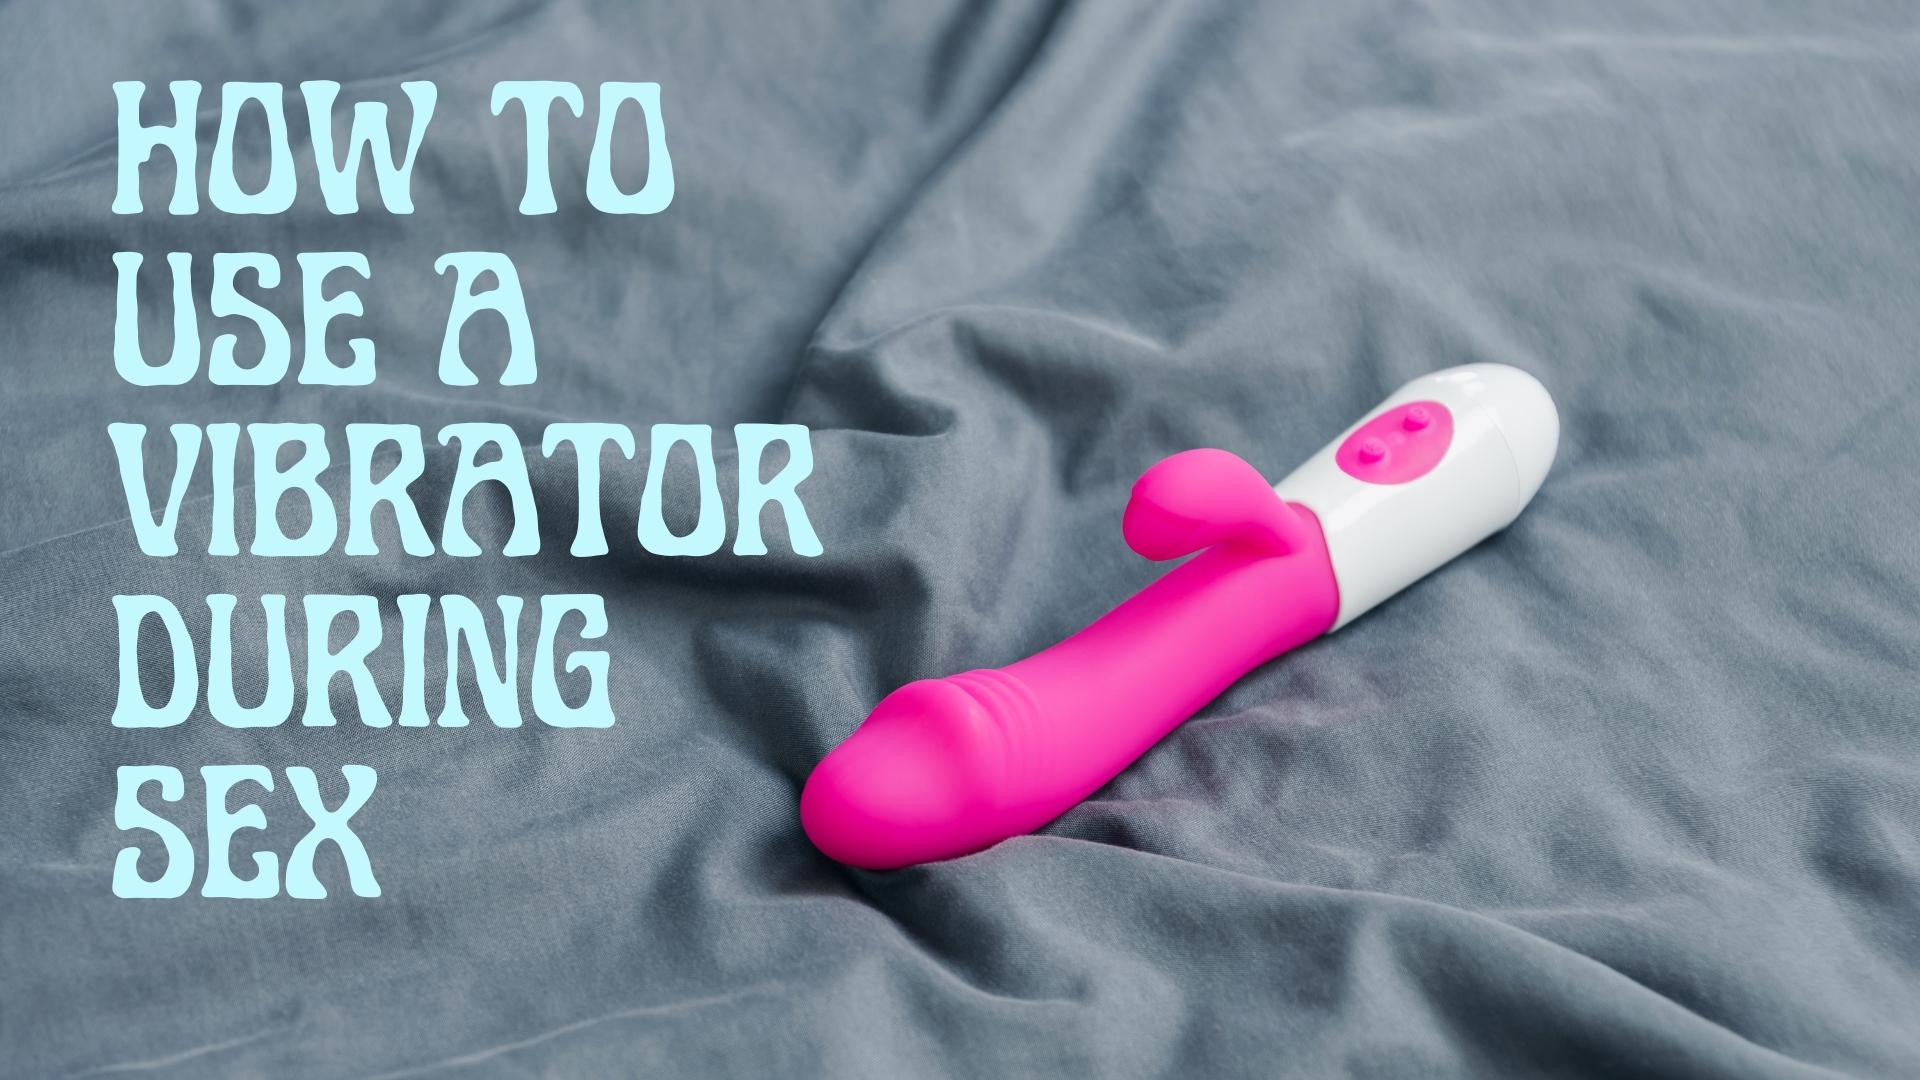 How to Use a Vibrator During Sex